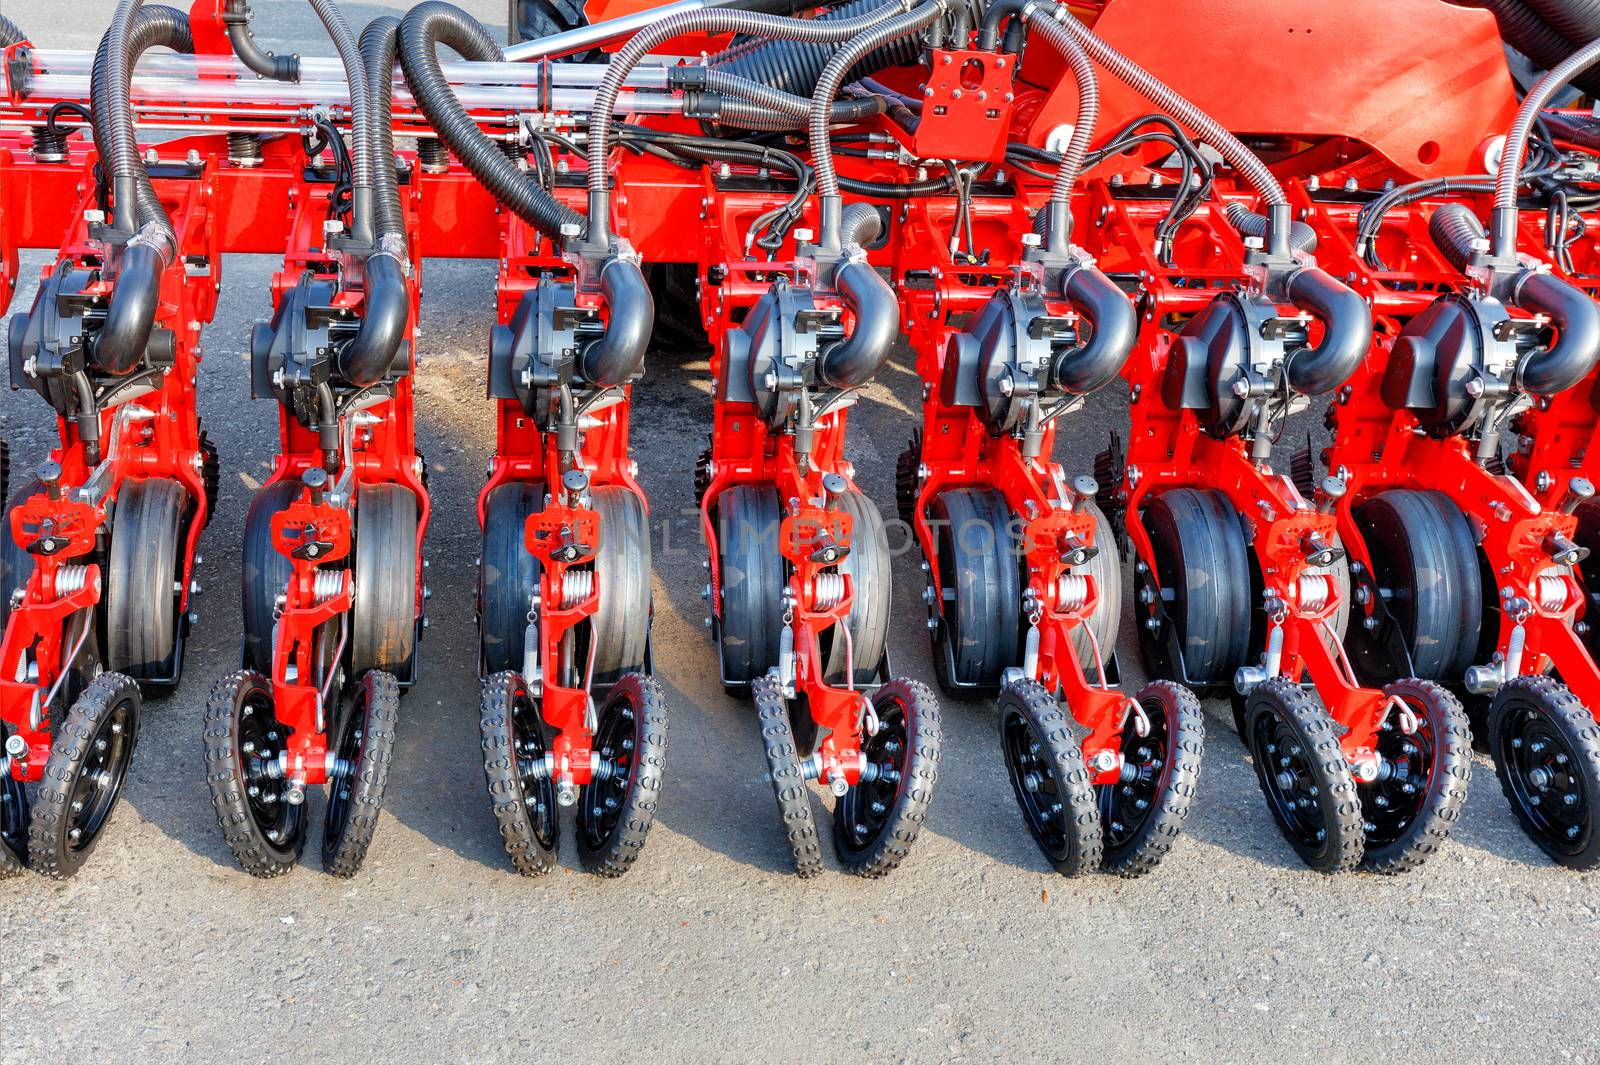 Red modern multi-row seeder, wheels, distribution pipes and working mechanisms of pneumatic agricultural seeder, copy space.